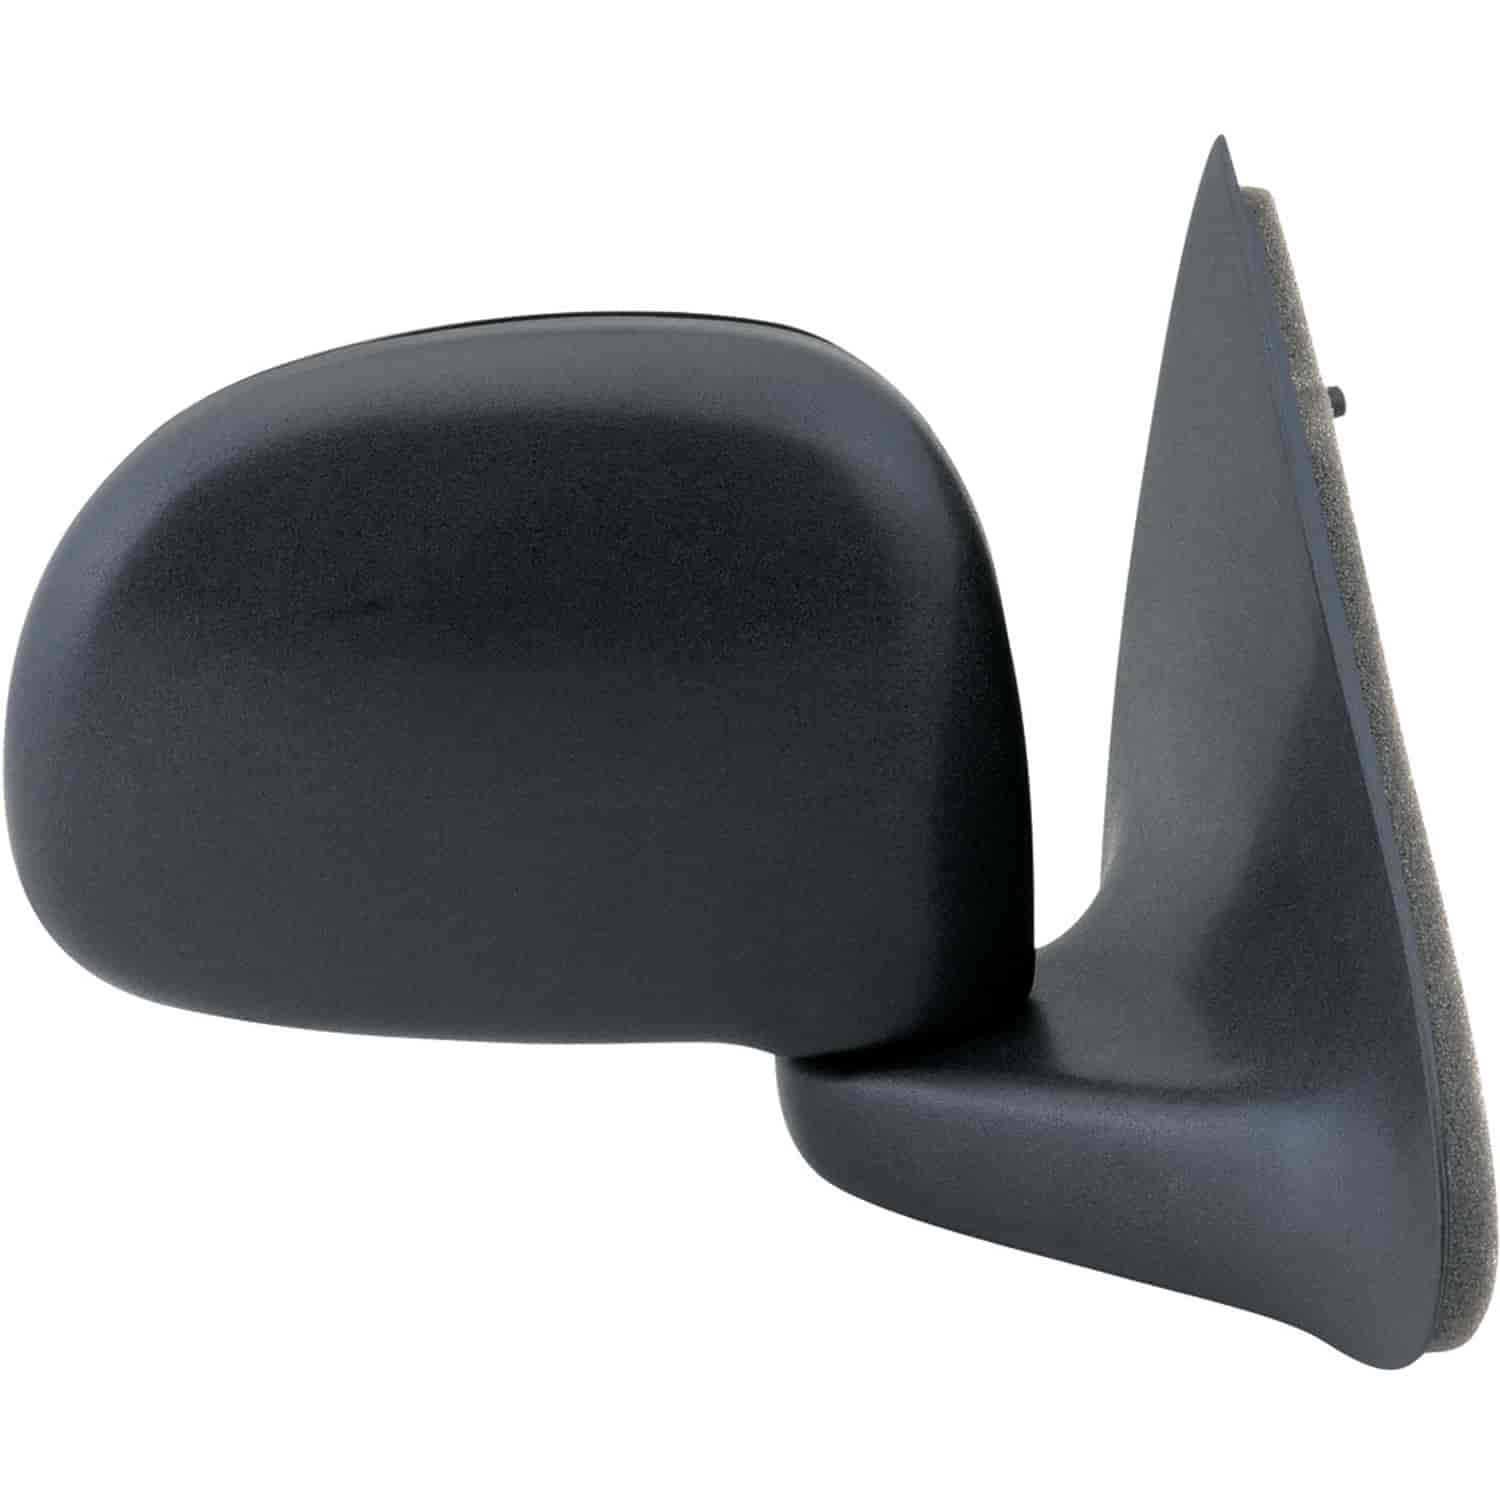 OEM Style Replacement mirror for 97-03 Ford F150 F250 LD Pick-Up passenger side mirror tested to fit